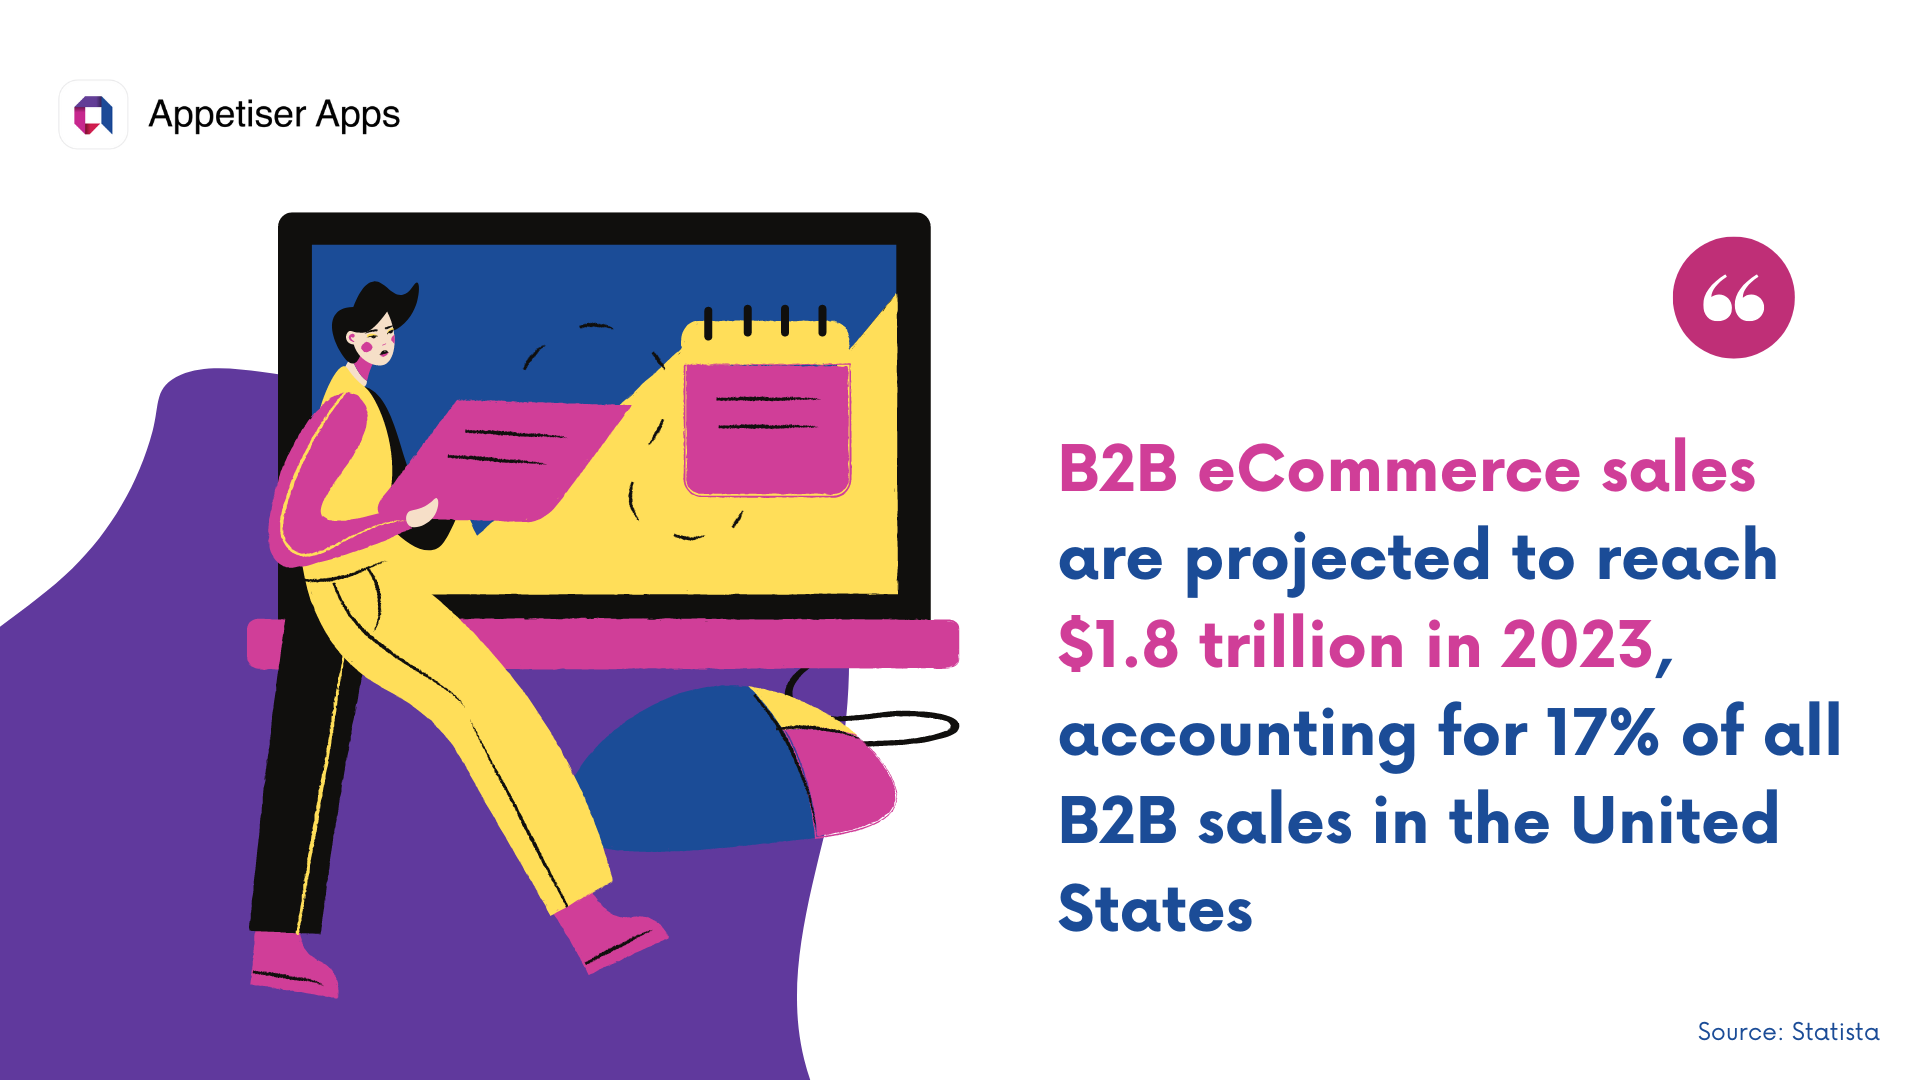 BETS: B2B ecommerce trends and statistics for 2023 in the United States